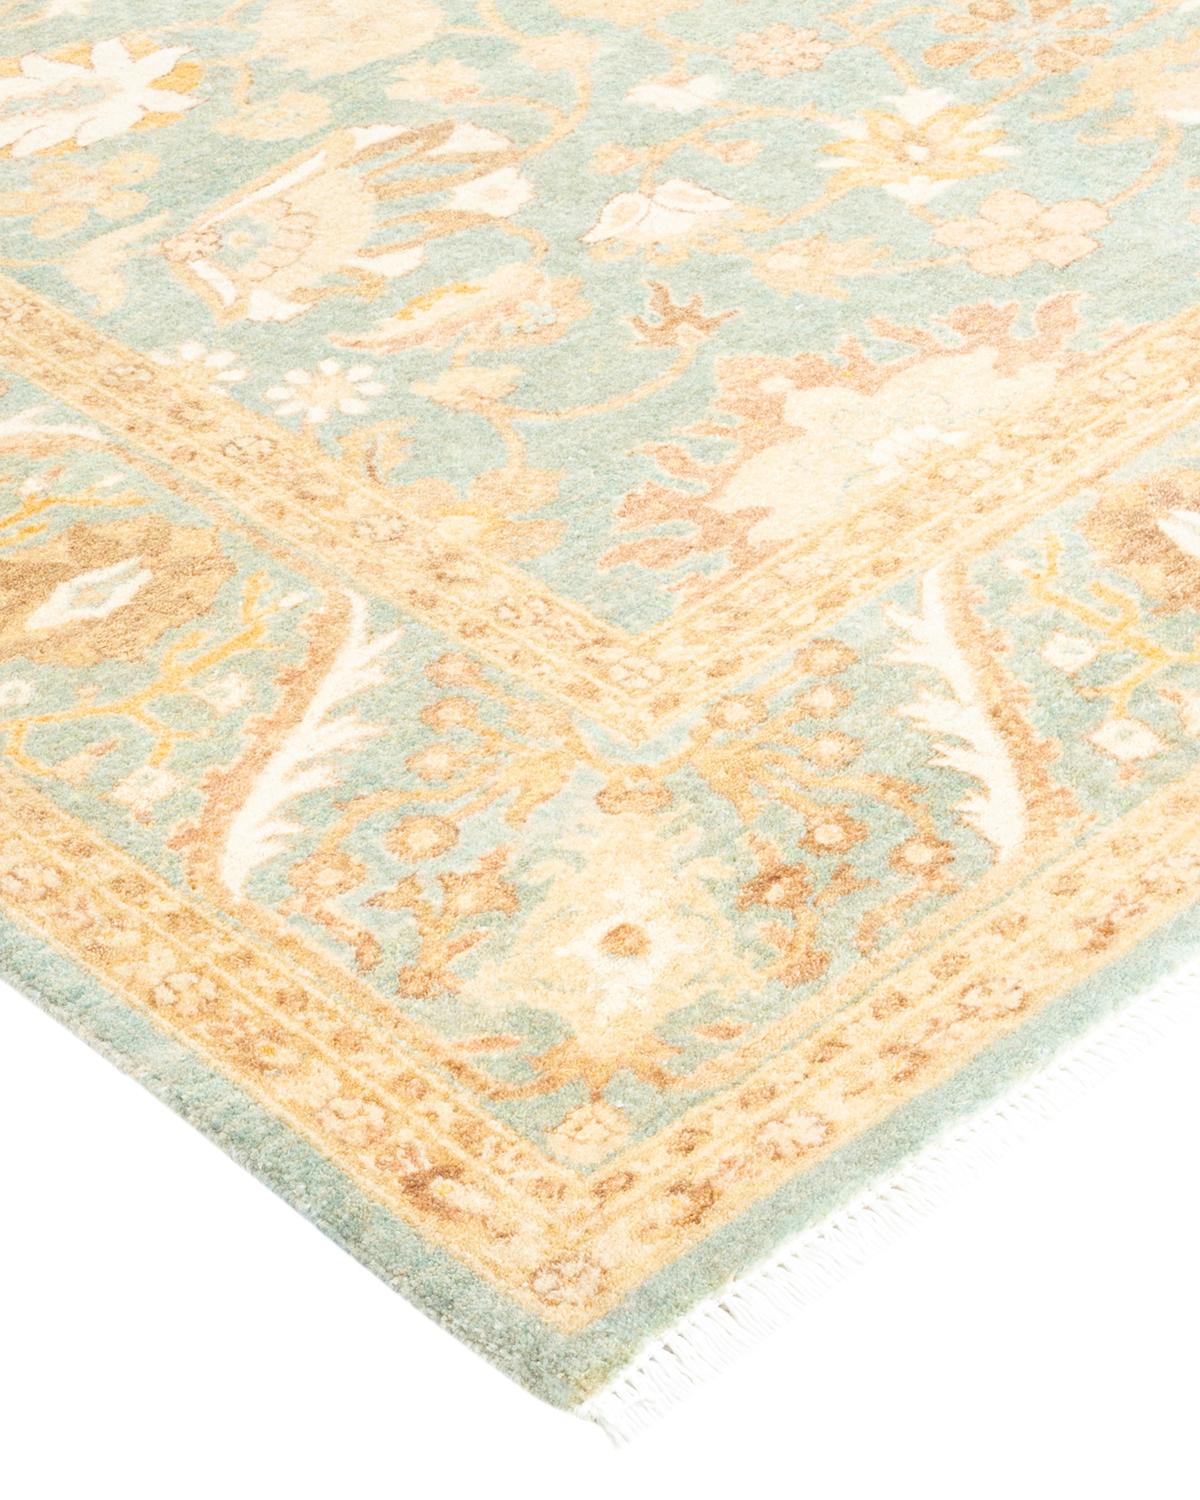 
With understated palettes and allover designs, the rugs in the Mogul Collection will bring timeless sophistication to any room. Influenced by a spectrum of Turkish, Indian, and Persian designs, the artisans who handweave these wool rugs imbue